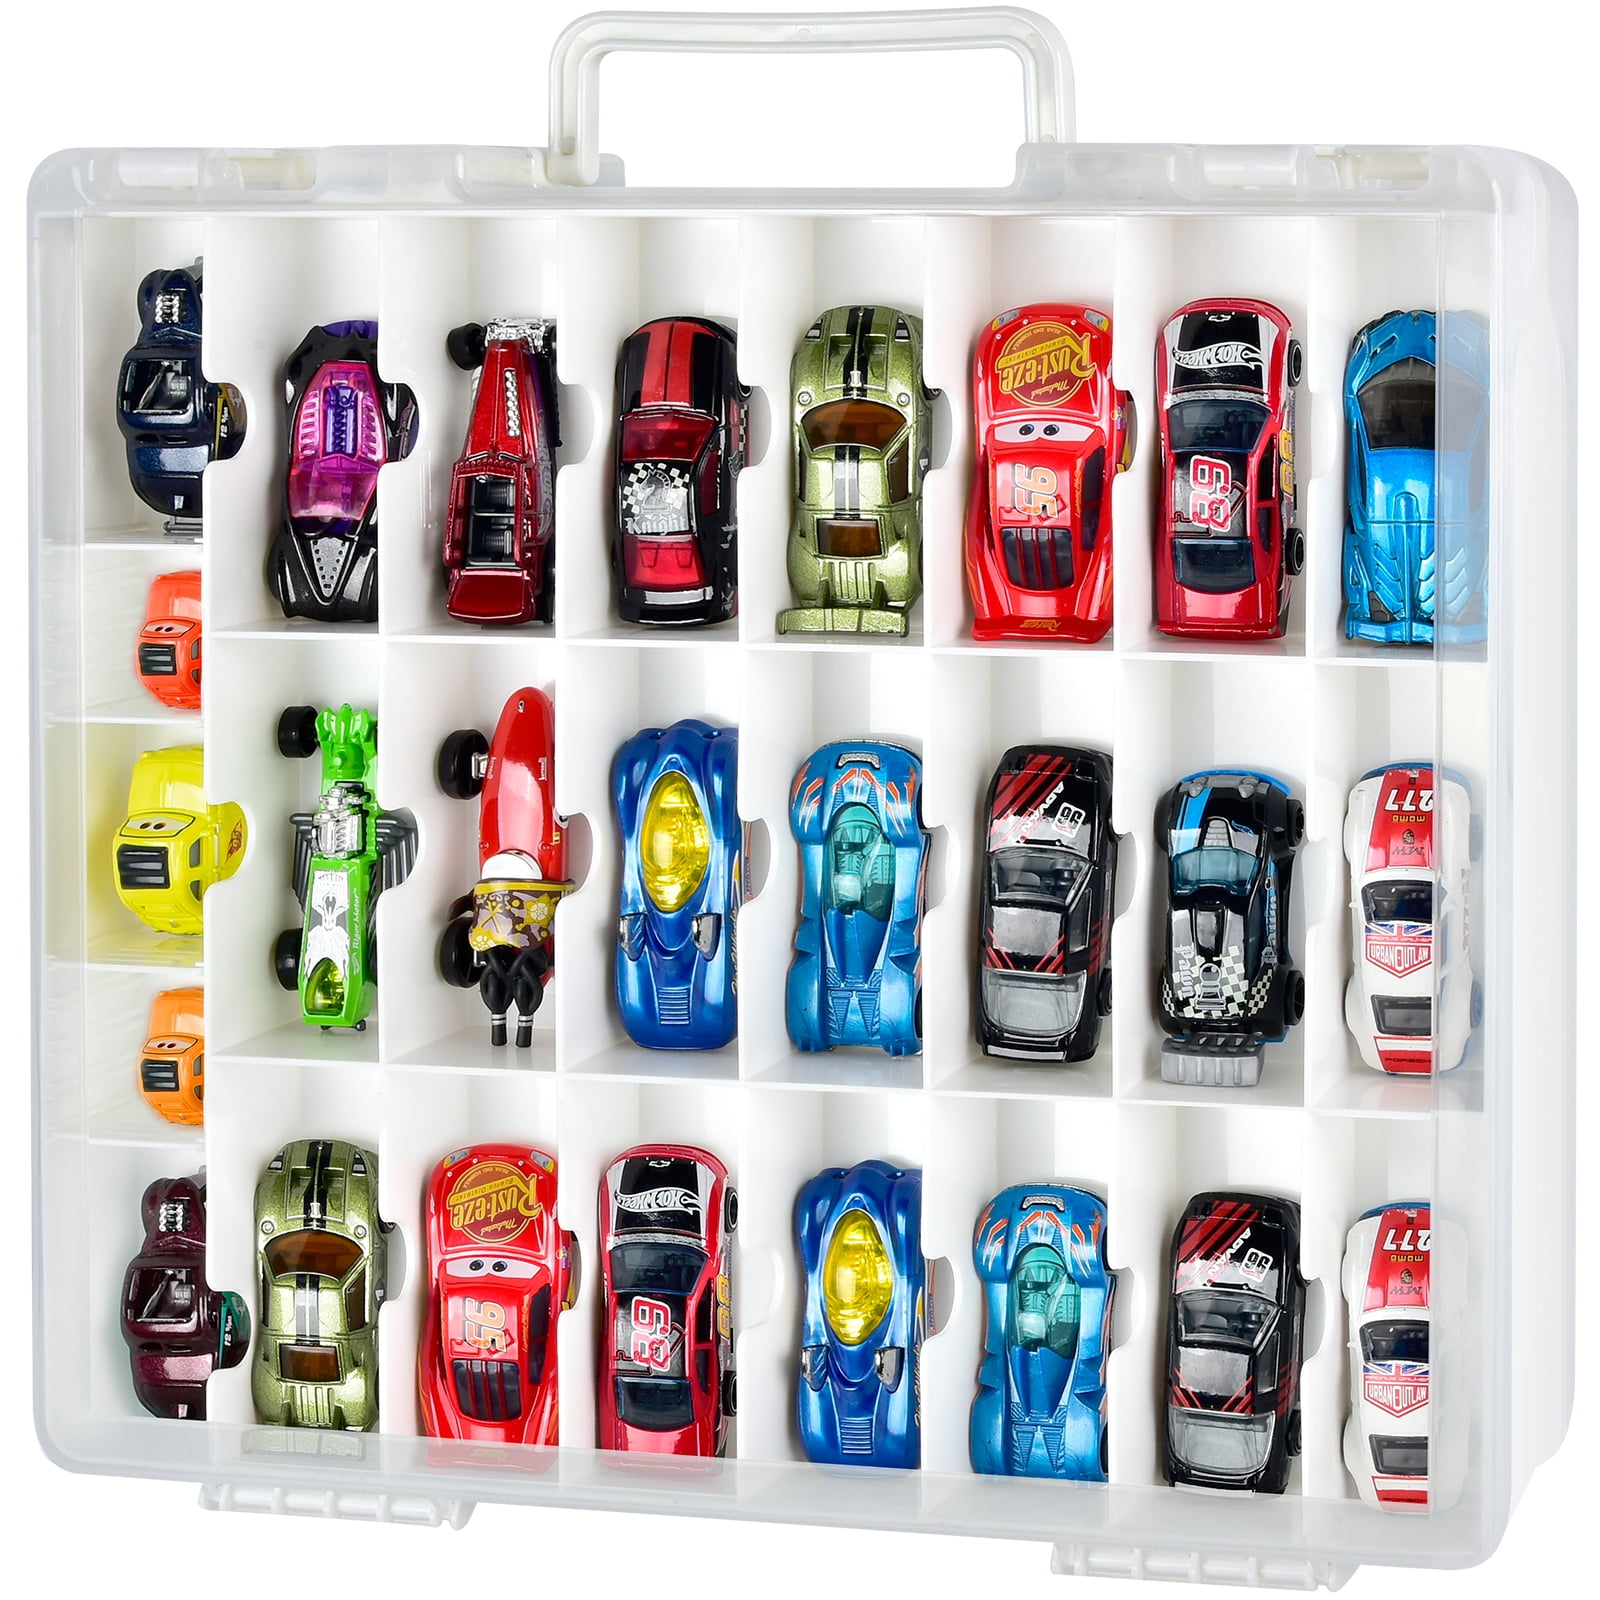 Carrying Case for 48 Hot Wheels Cars, Kids Toy Cars Storage Case Hold 48 Hot Wheels Cars Bag Only Blue